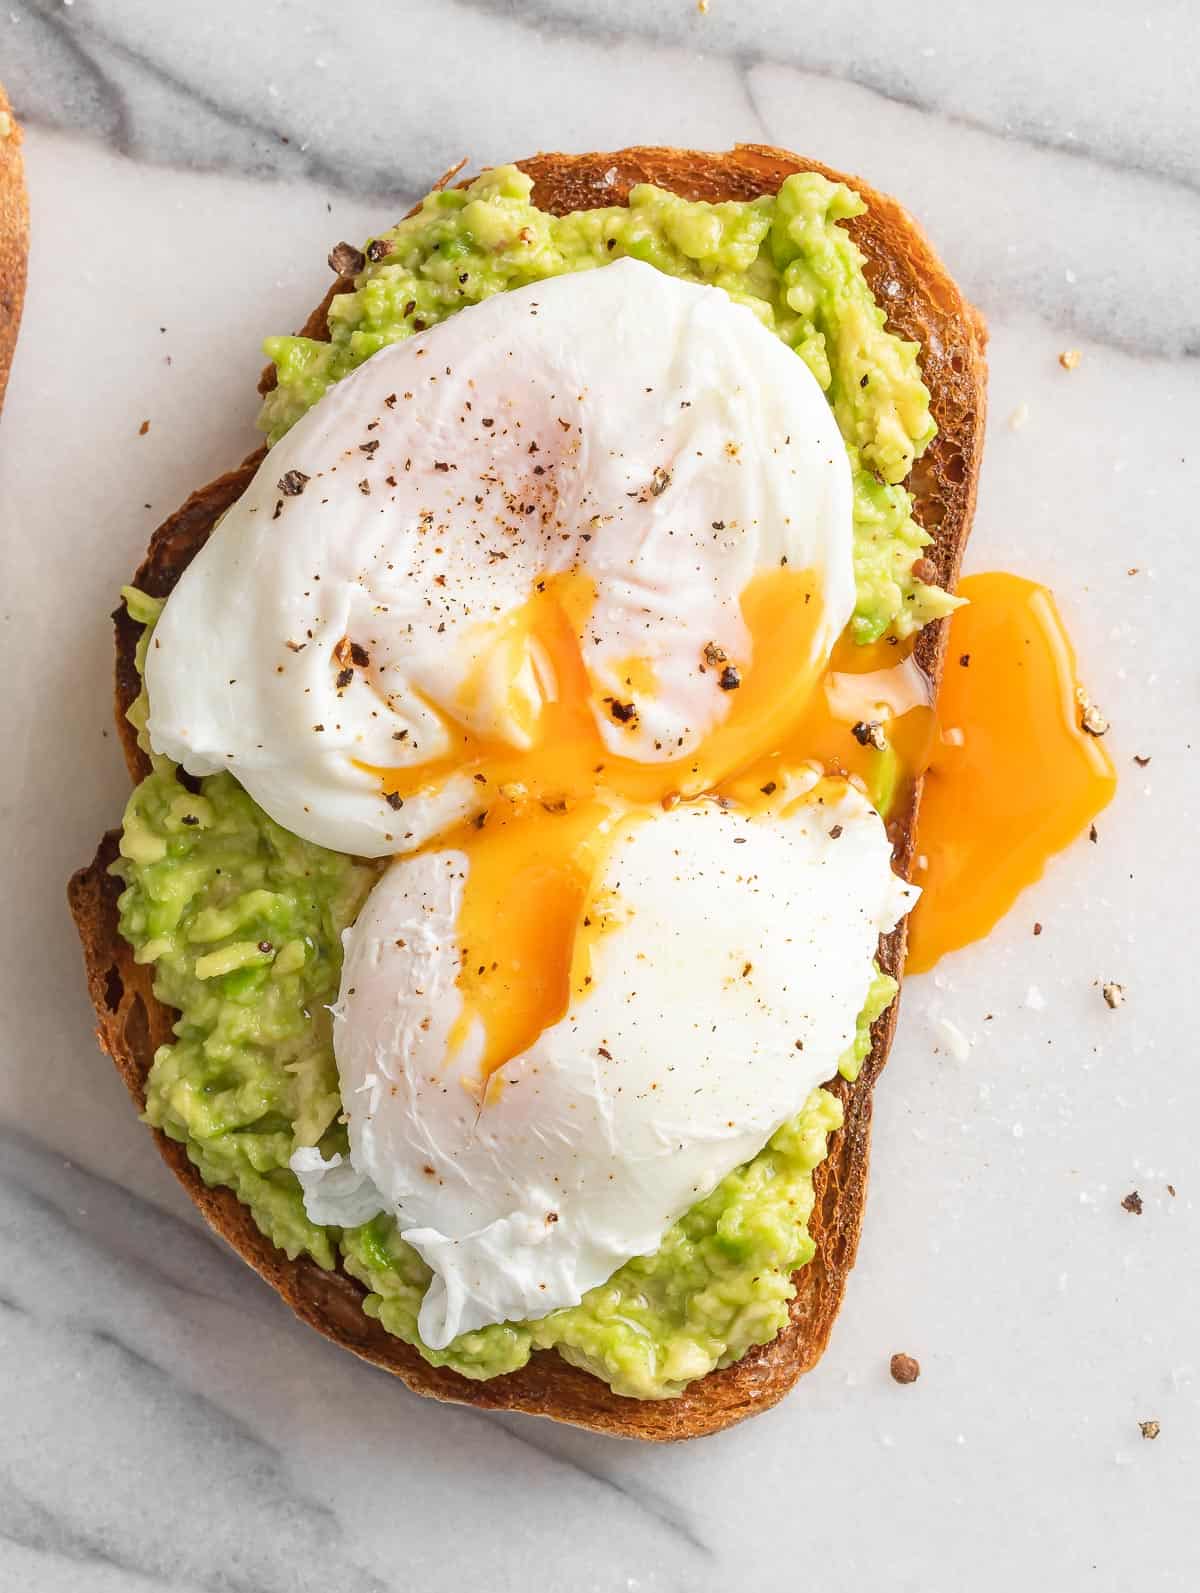 Avocado on toast bread topped with pouched egg